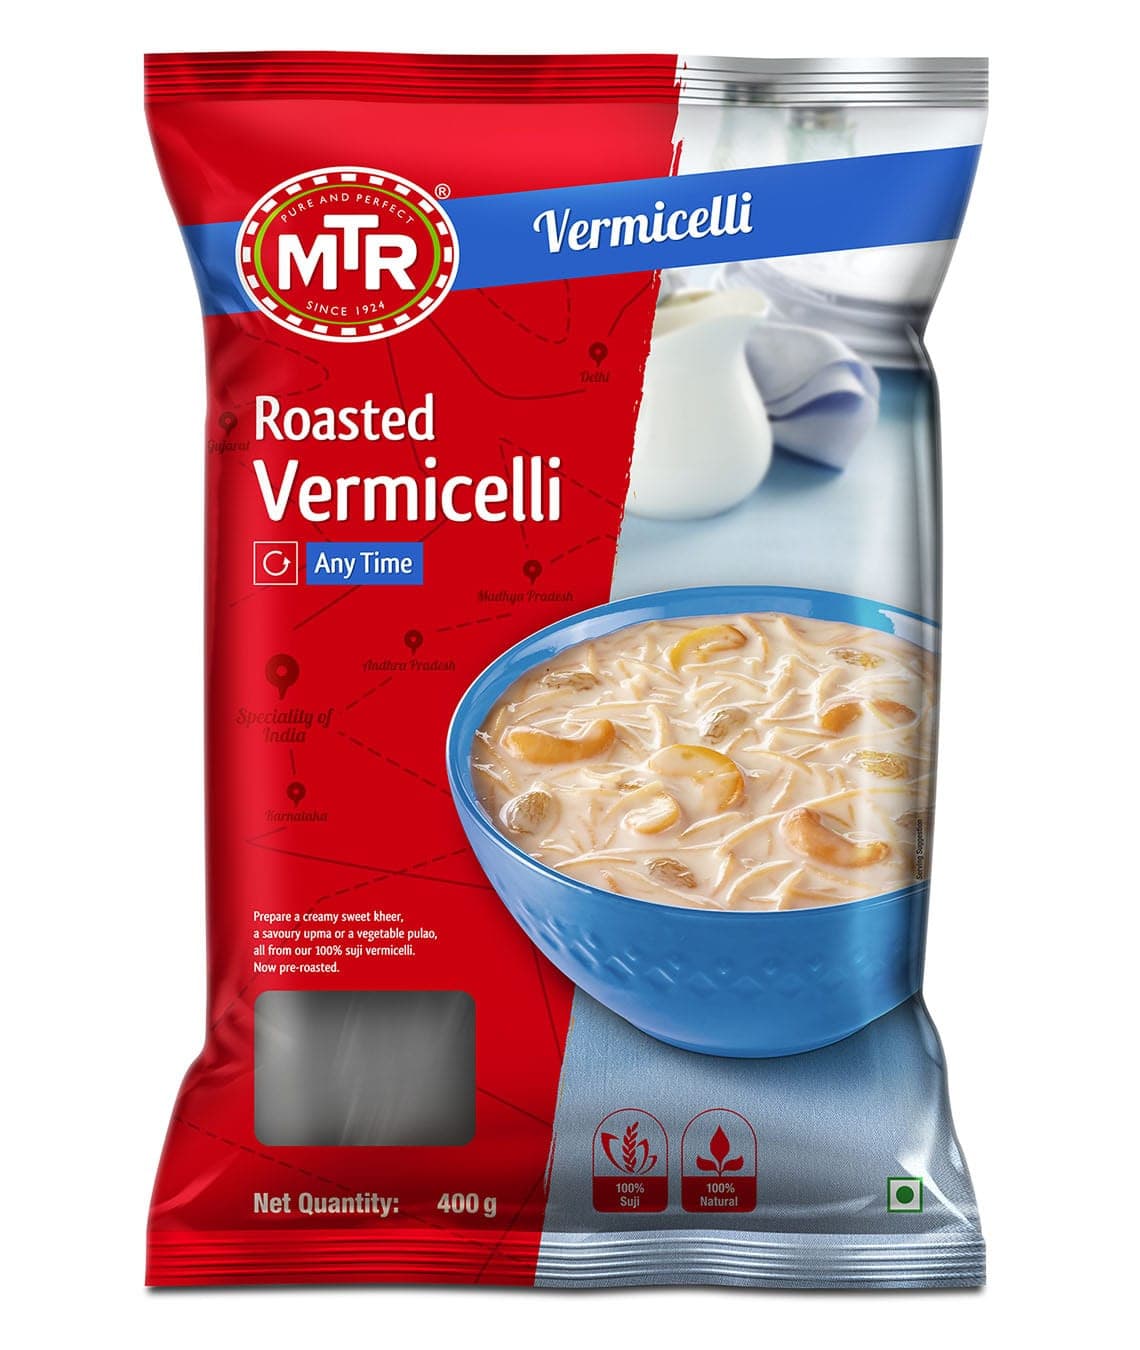 MTR Vermicelli Roasted.